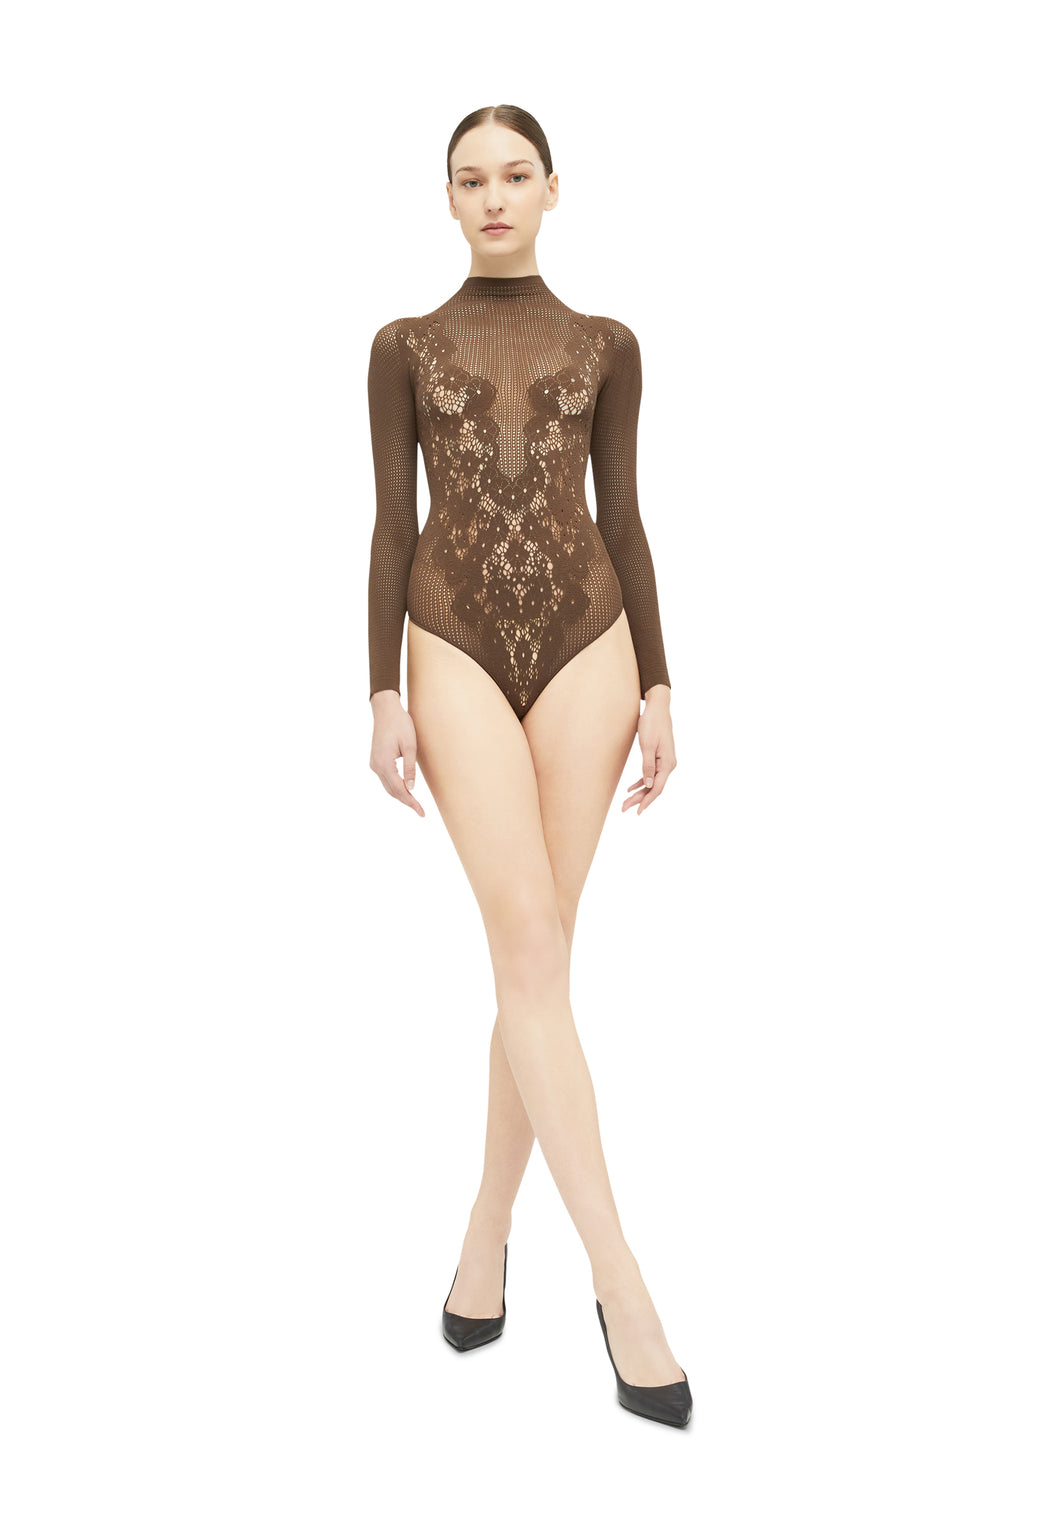 Flower Lace String Body